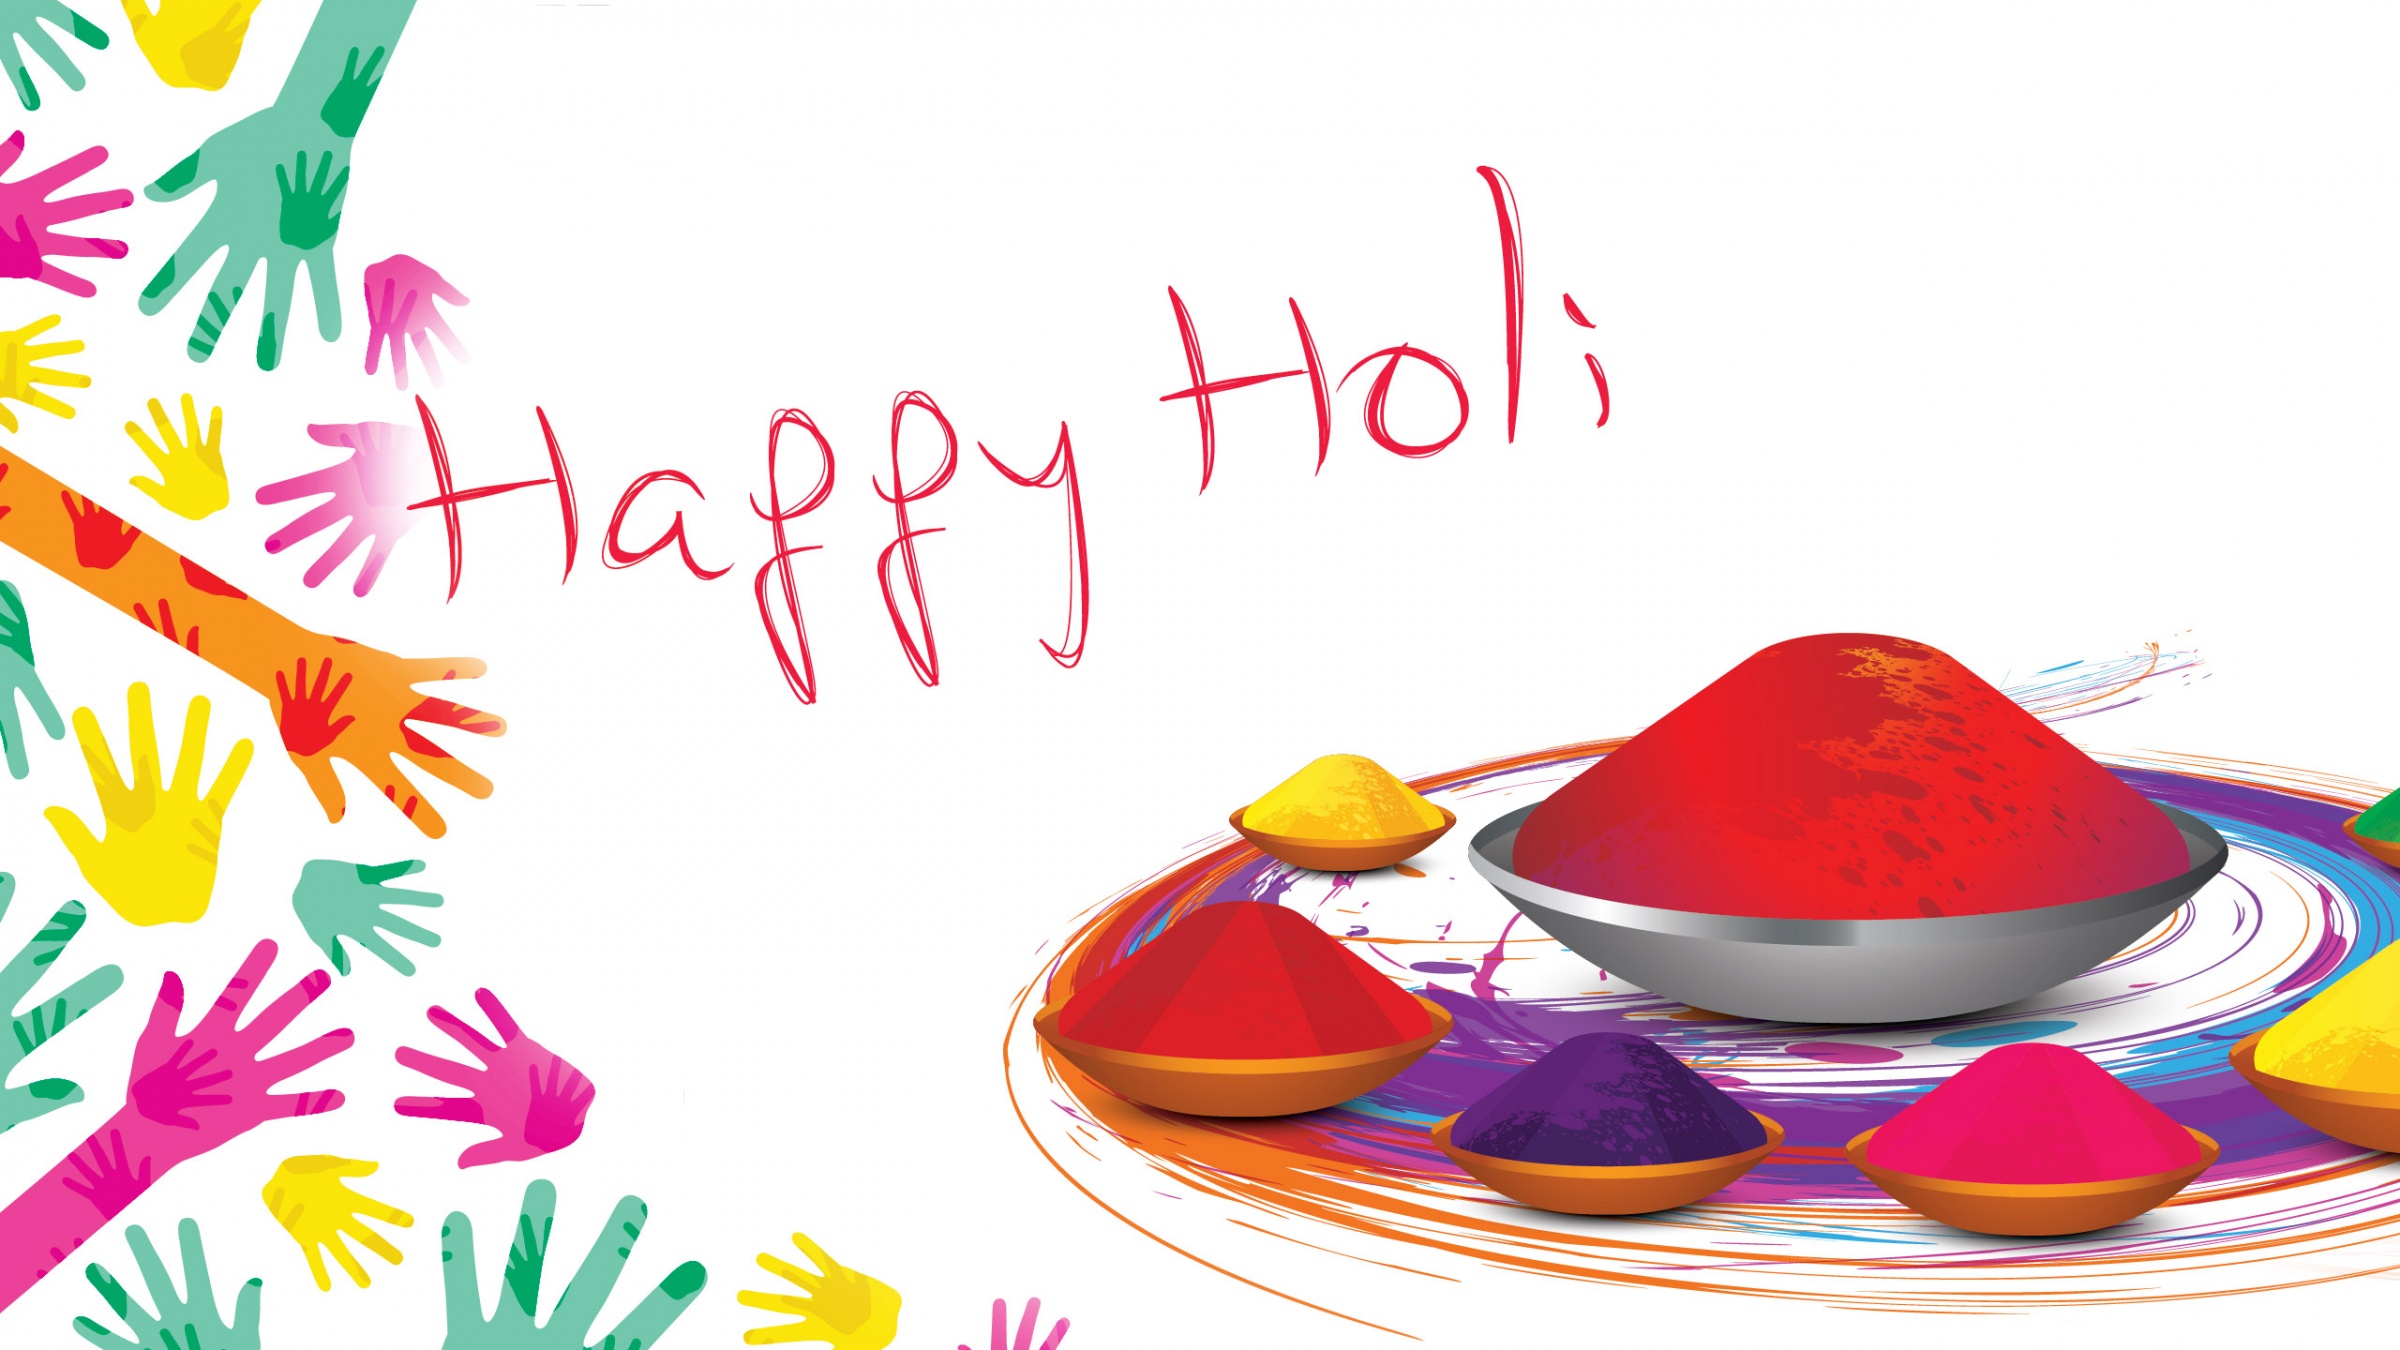 Holi Festival Of Colors - Happy Holi Wishes 2019 , HD Wallpaper & Backgrounds